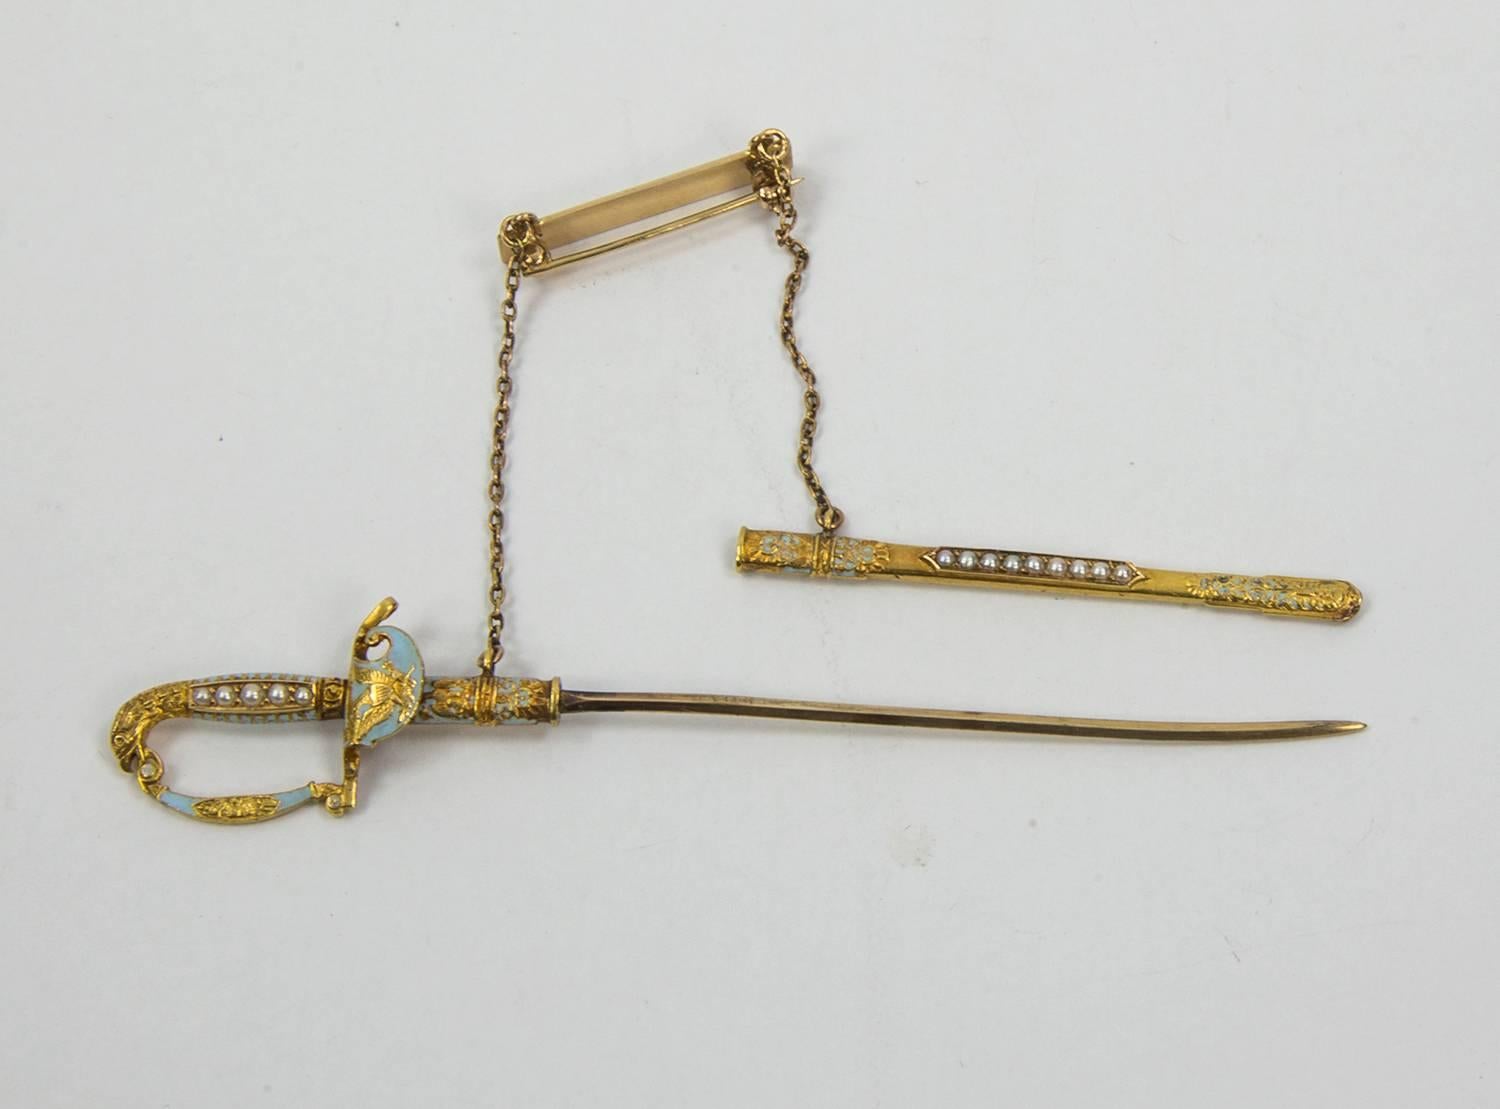 Unique Sword & Sheath Jabot Pin accented with tiny seed Pearls and light blue enamel; tests to 14k yellow gold; C1880s. A must have heirloom for now and forever! 
